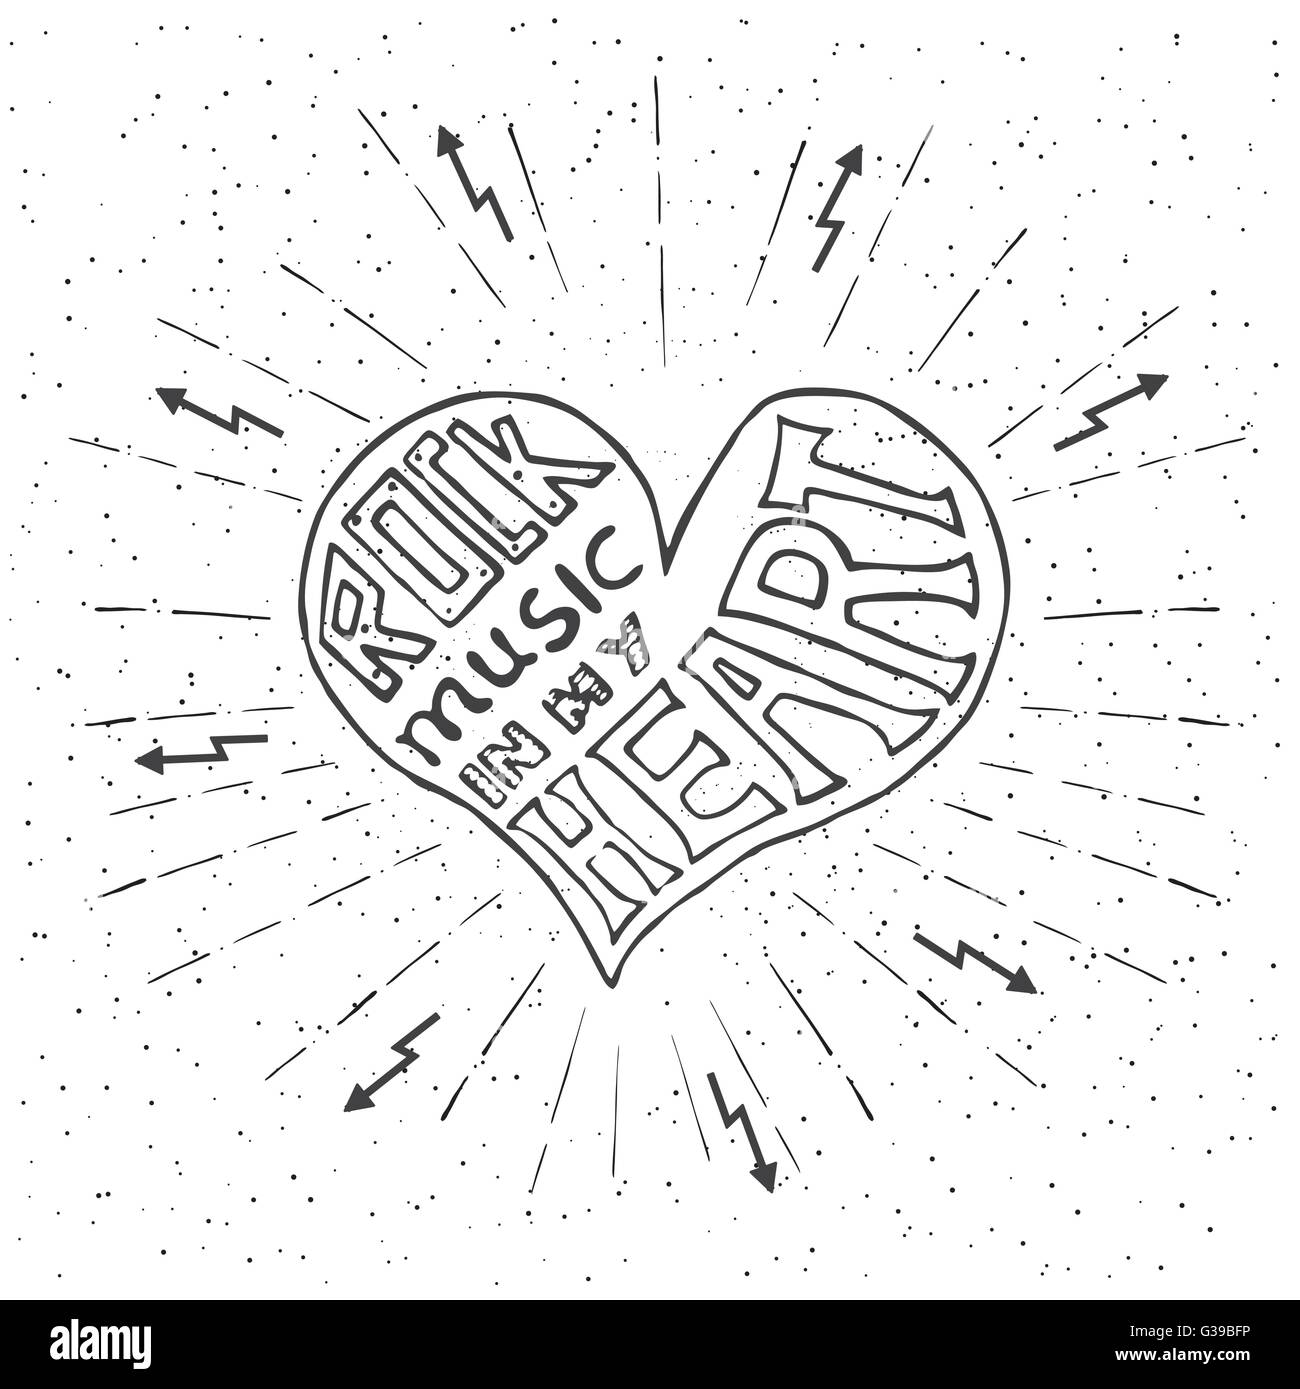 Rock music in my heart. Hand drawn lettering design with heart. Typography concept for t-shirt design or web site. Stock Vector